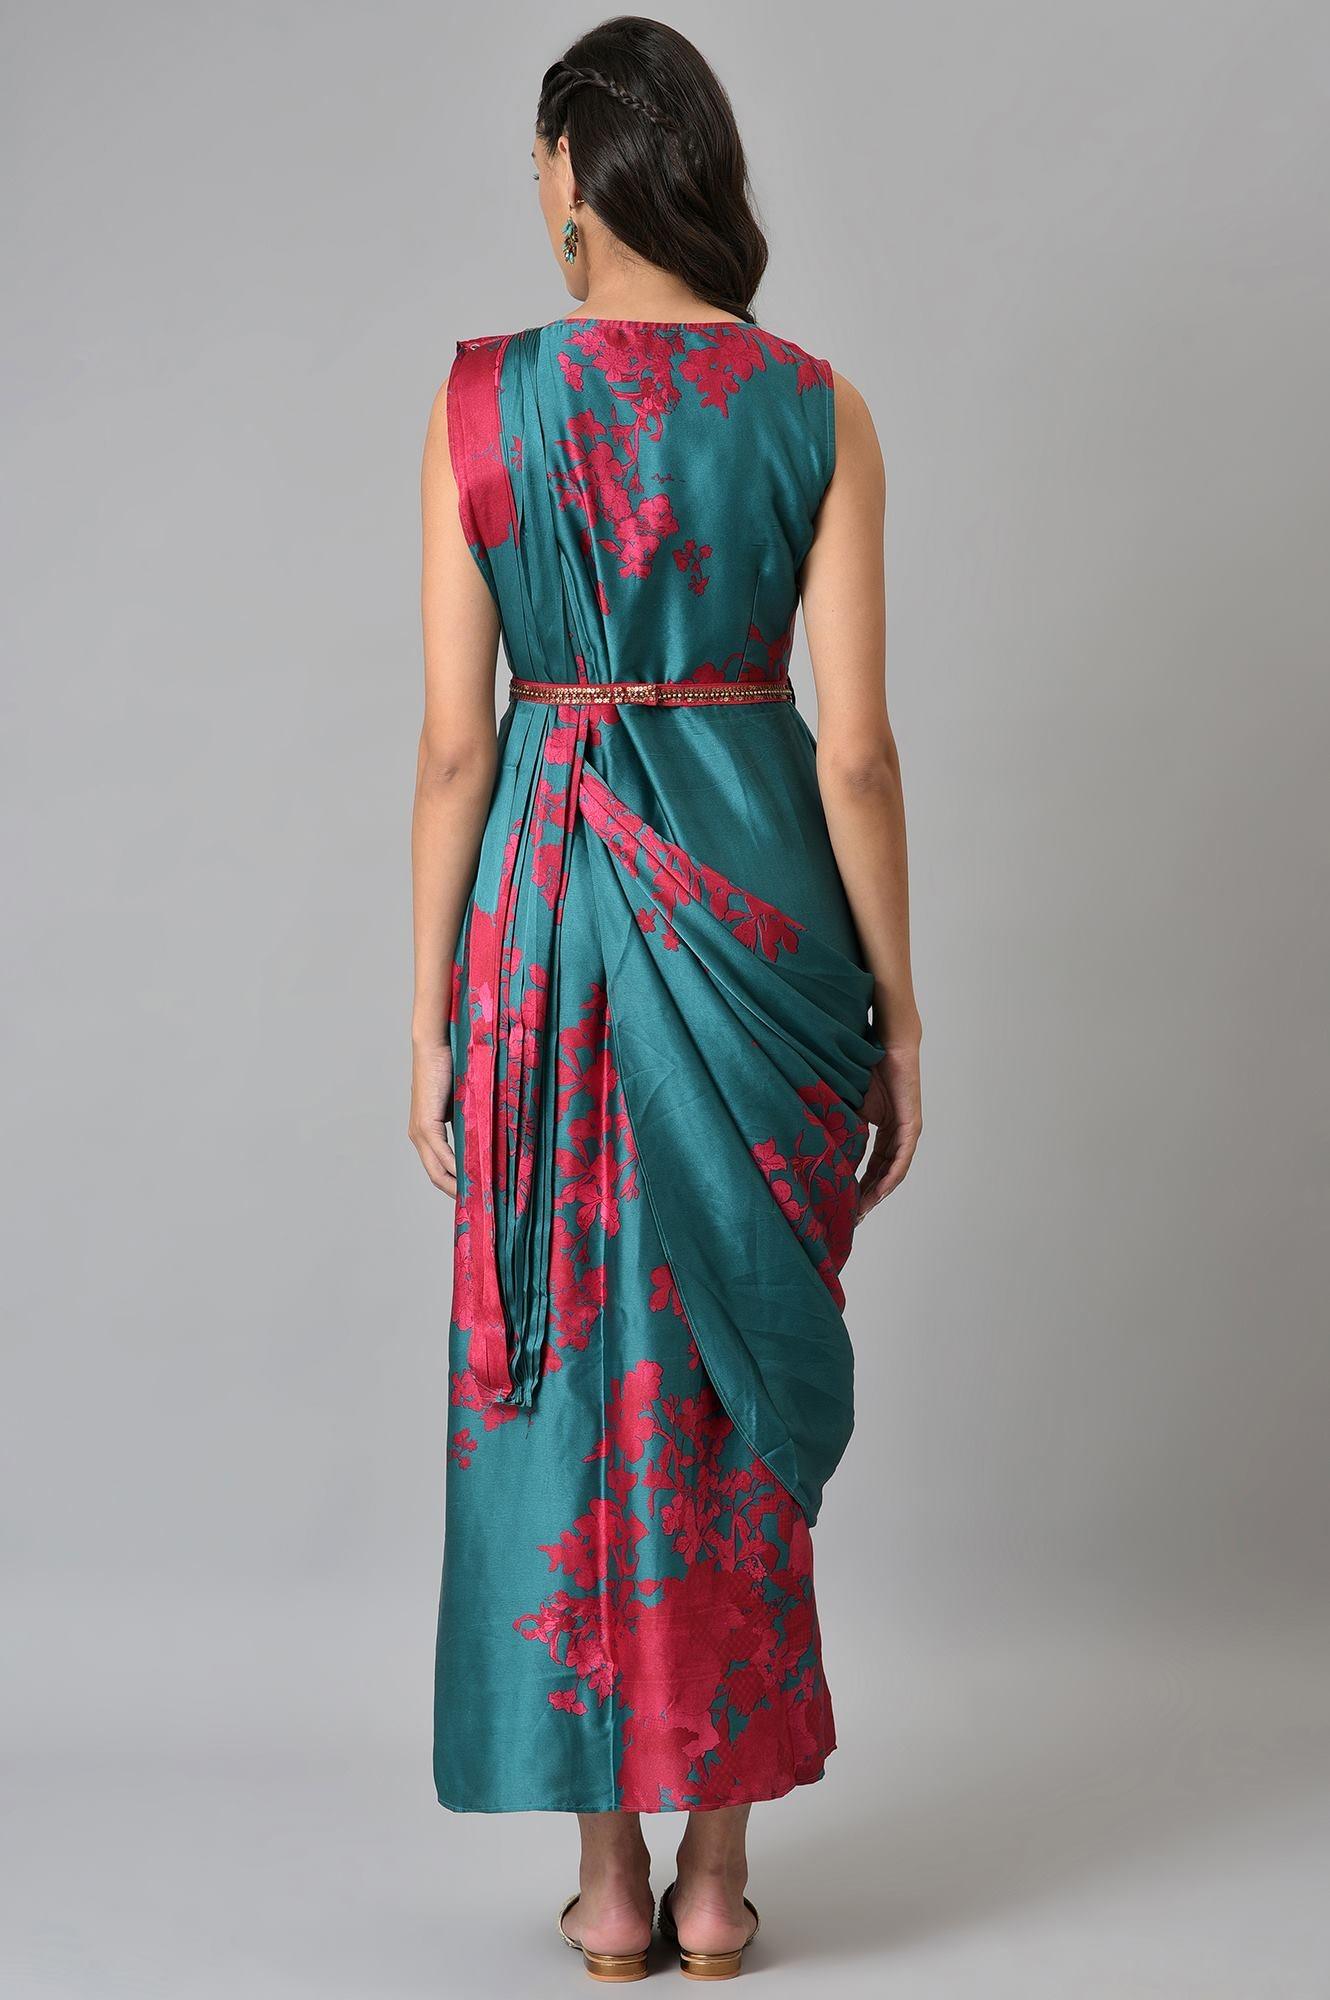 Green And Red Sleeveless Predrape Saree Dress With Belt And Tailored Jacket - wforwoman